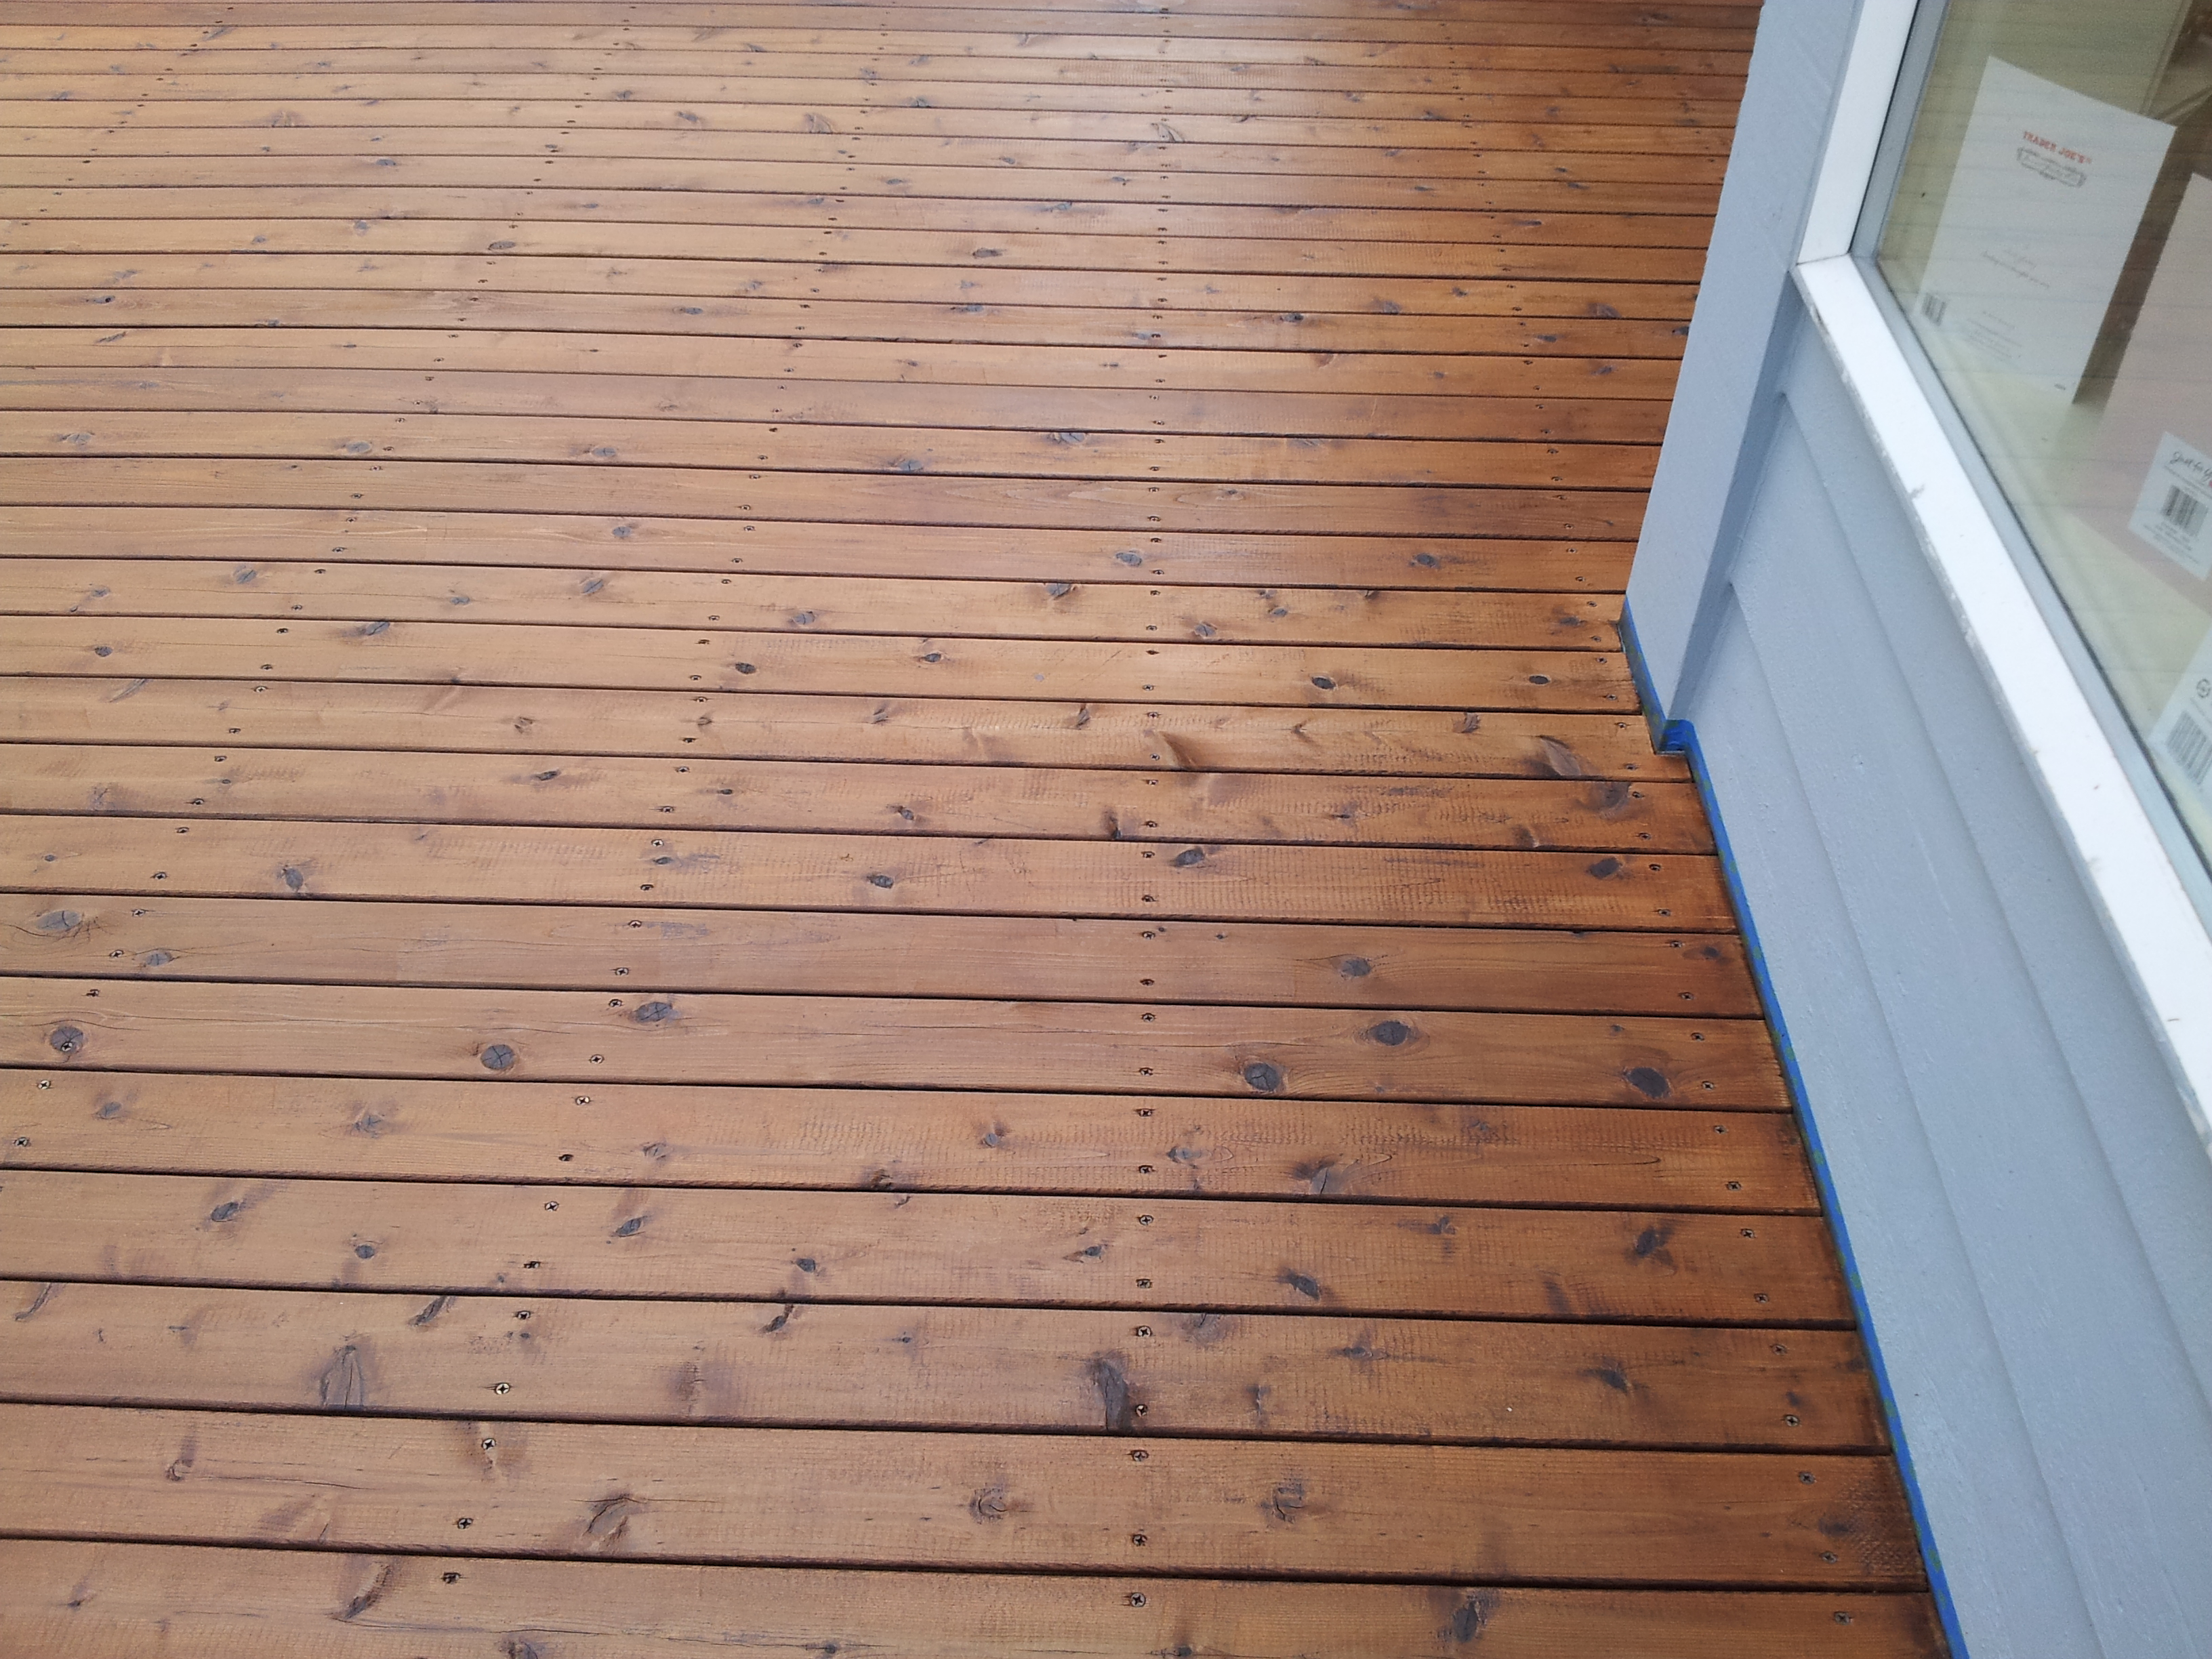 Oil Based Deck Stains 2019 Best Deck Stain Reviews Ratings within size 3264 X 2448